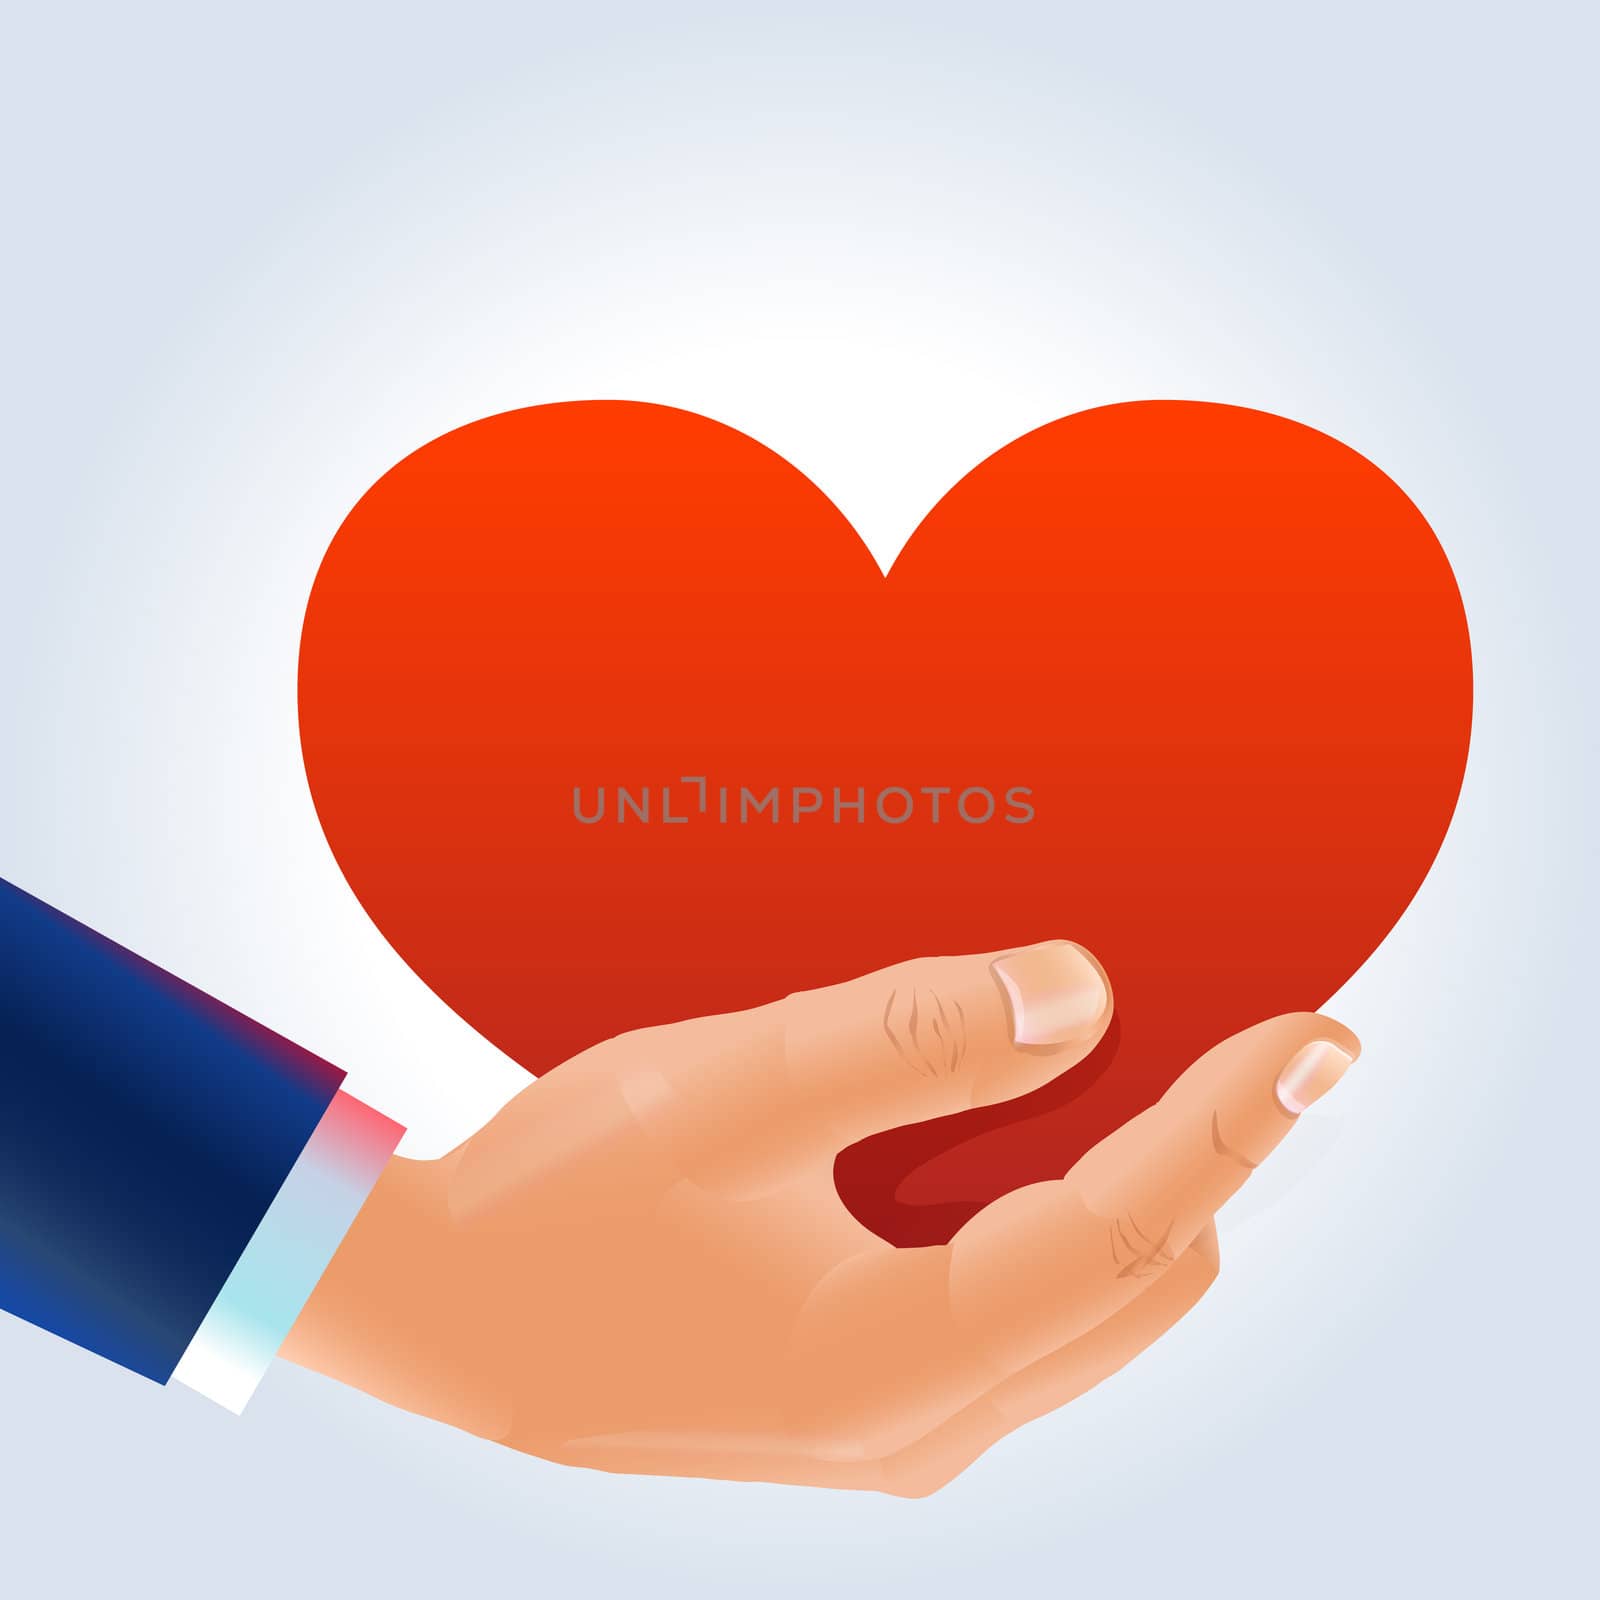 Strong male's hand in a dark blue jacket sleeve holds big bright red heart shape as a symbol of relations, love, romance, dating